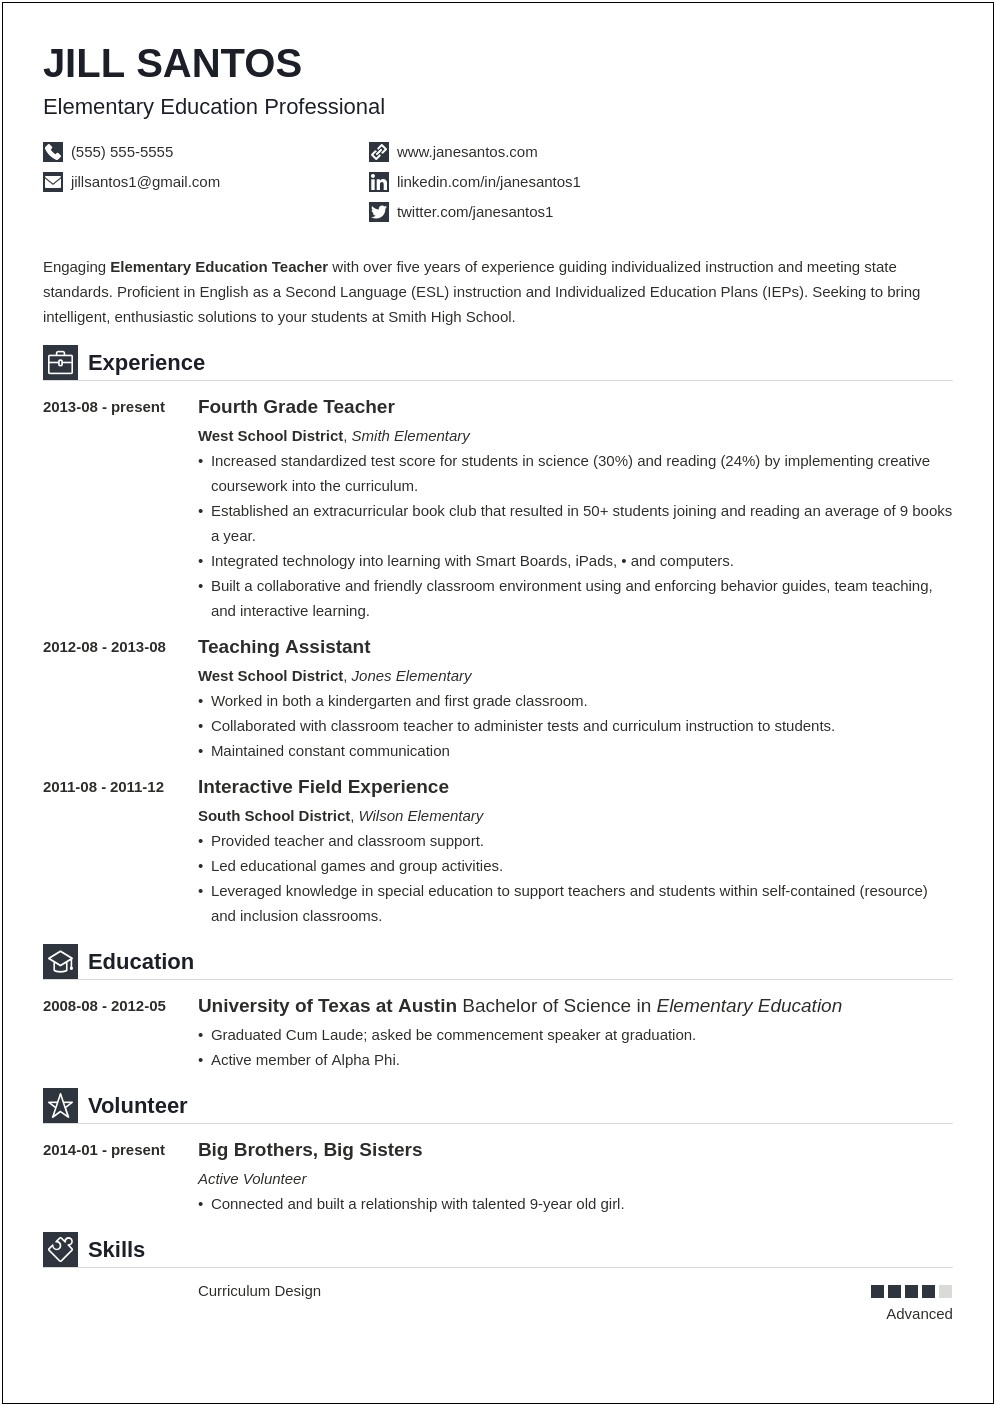 Work Experience Education And Skills On Resume